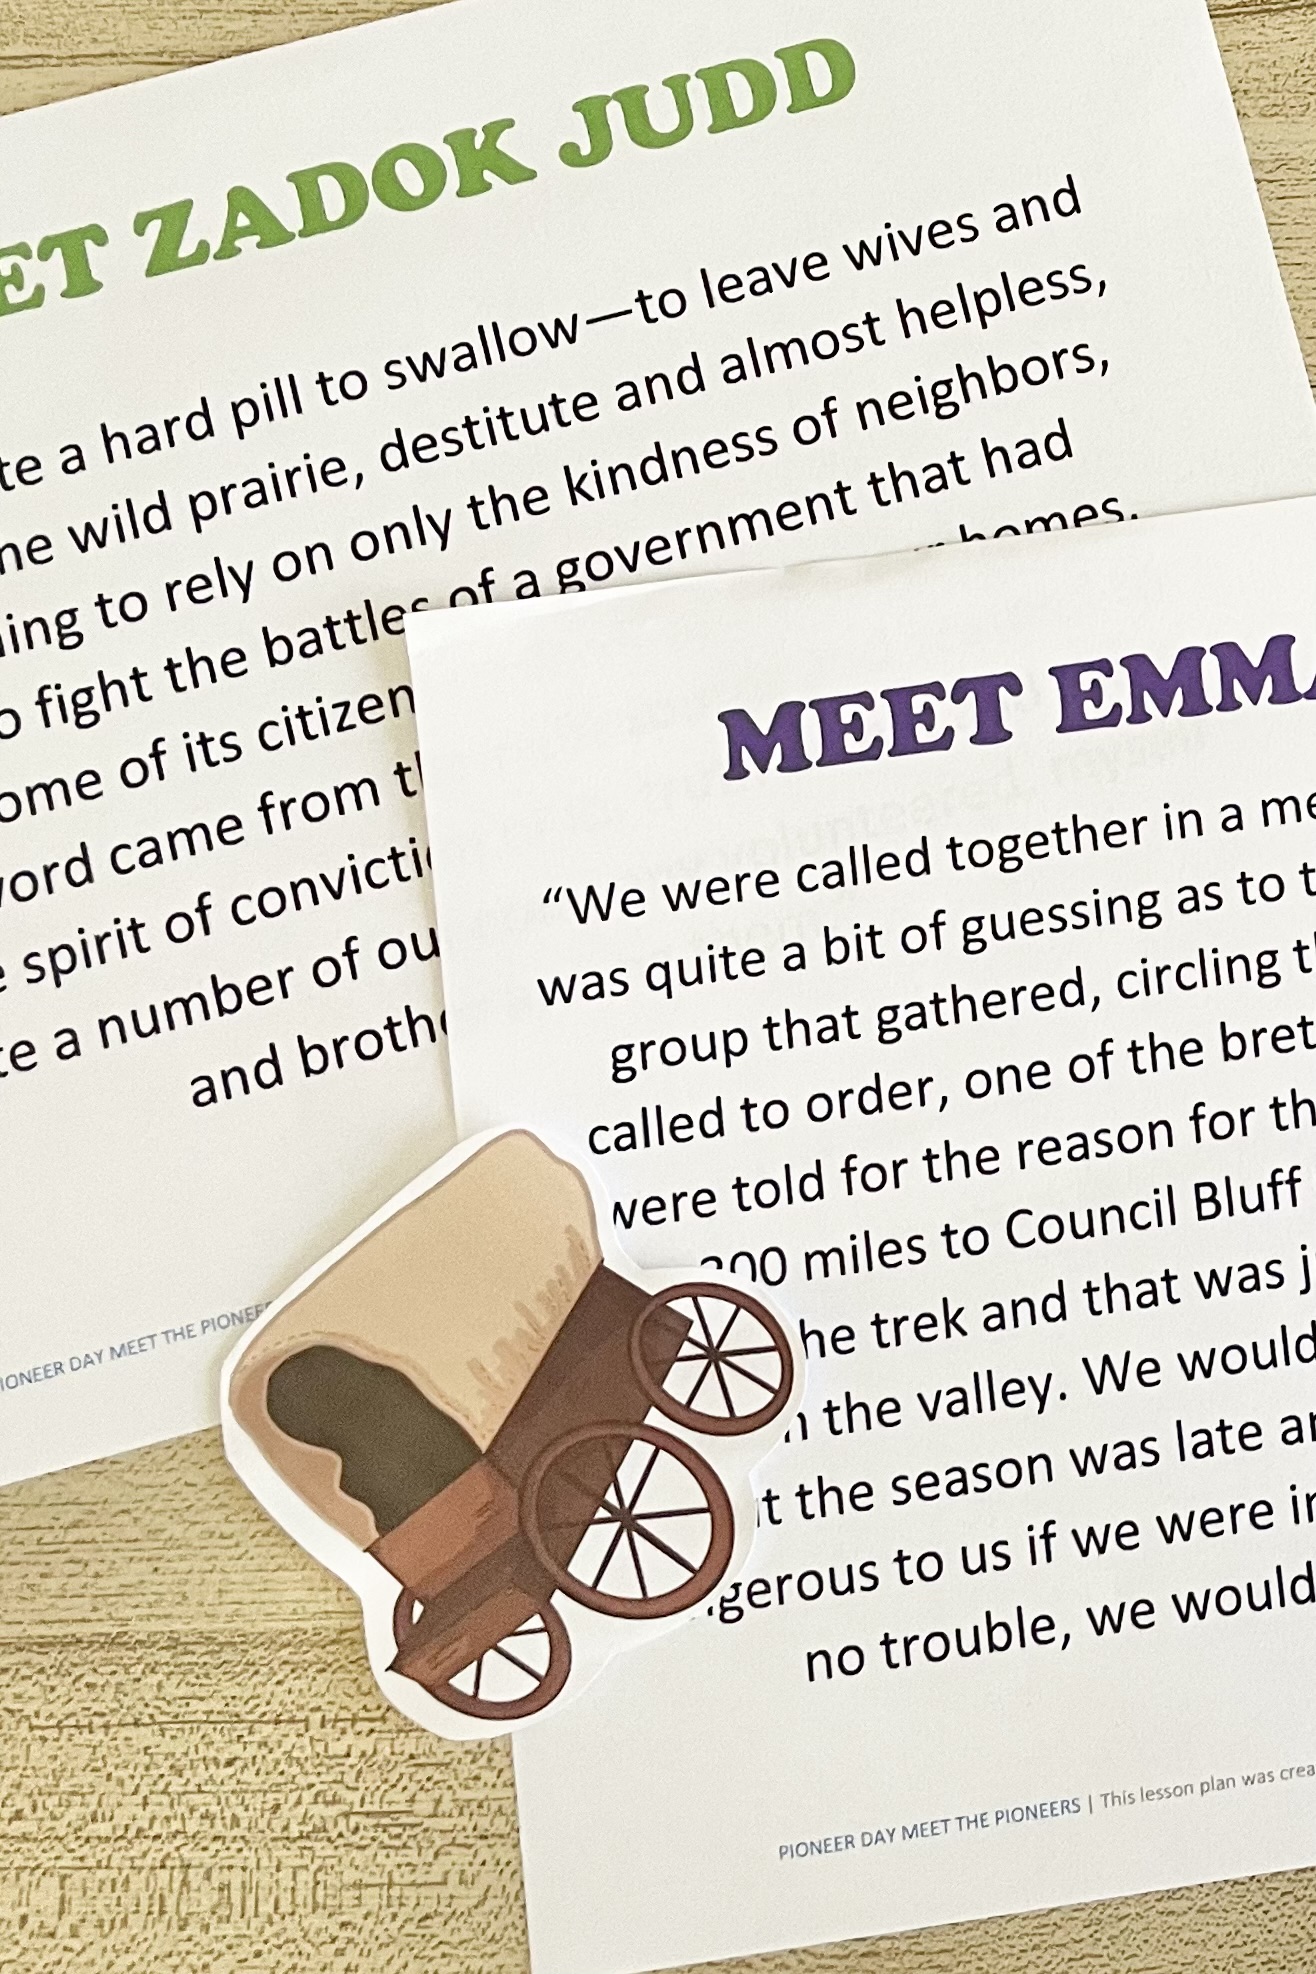 Pioneer Day Meet the Pioneers! Bring Pioneer Day to life by sharing journal excerpts from pioneers while reviewing primary songs for LDS Primary Music Leaders.